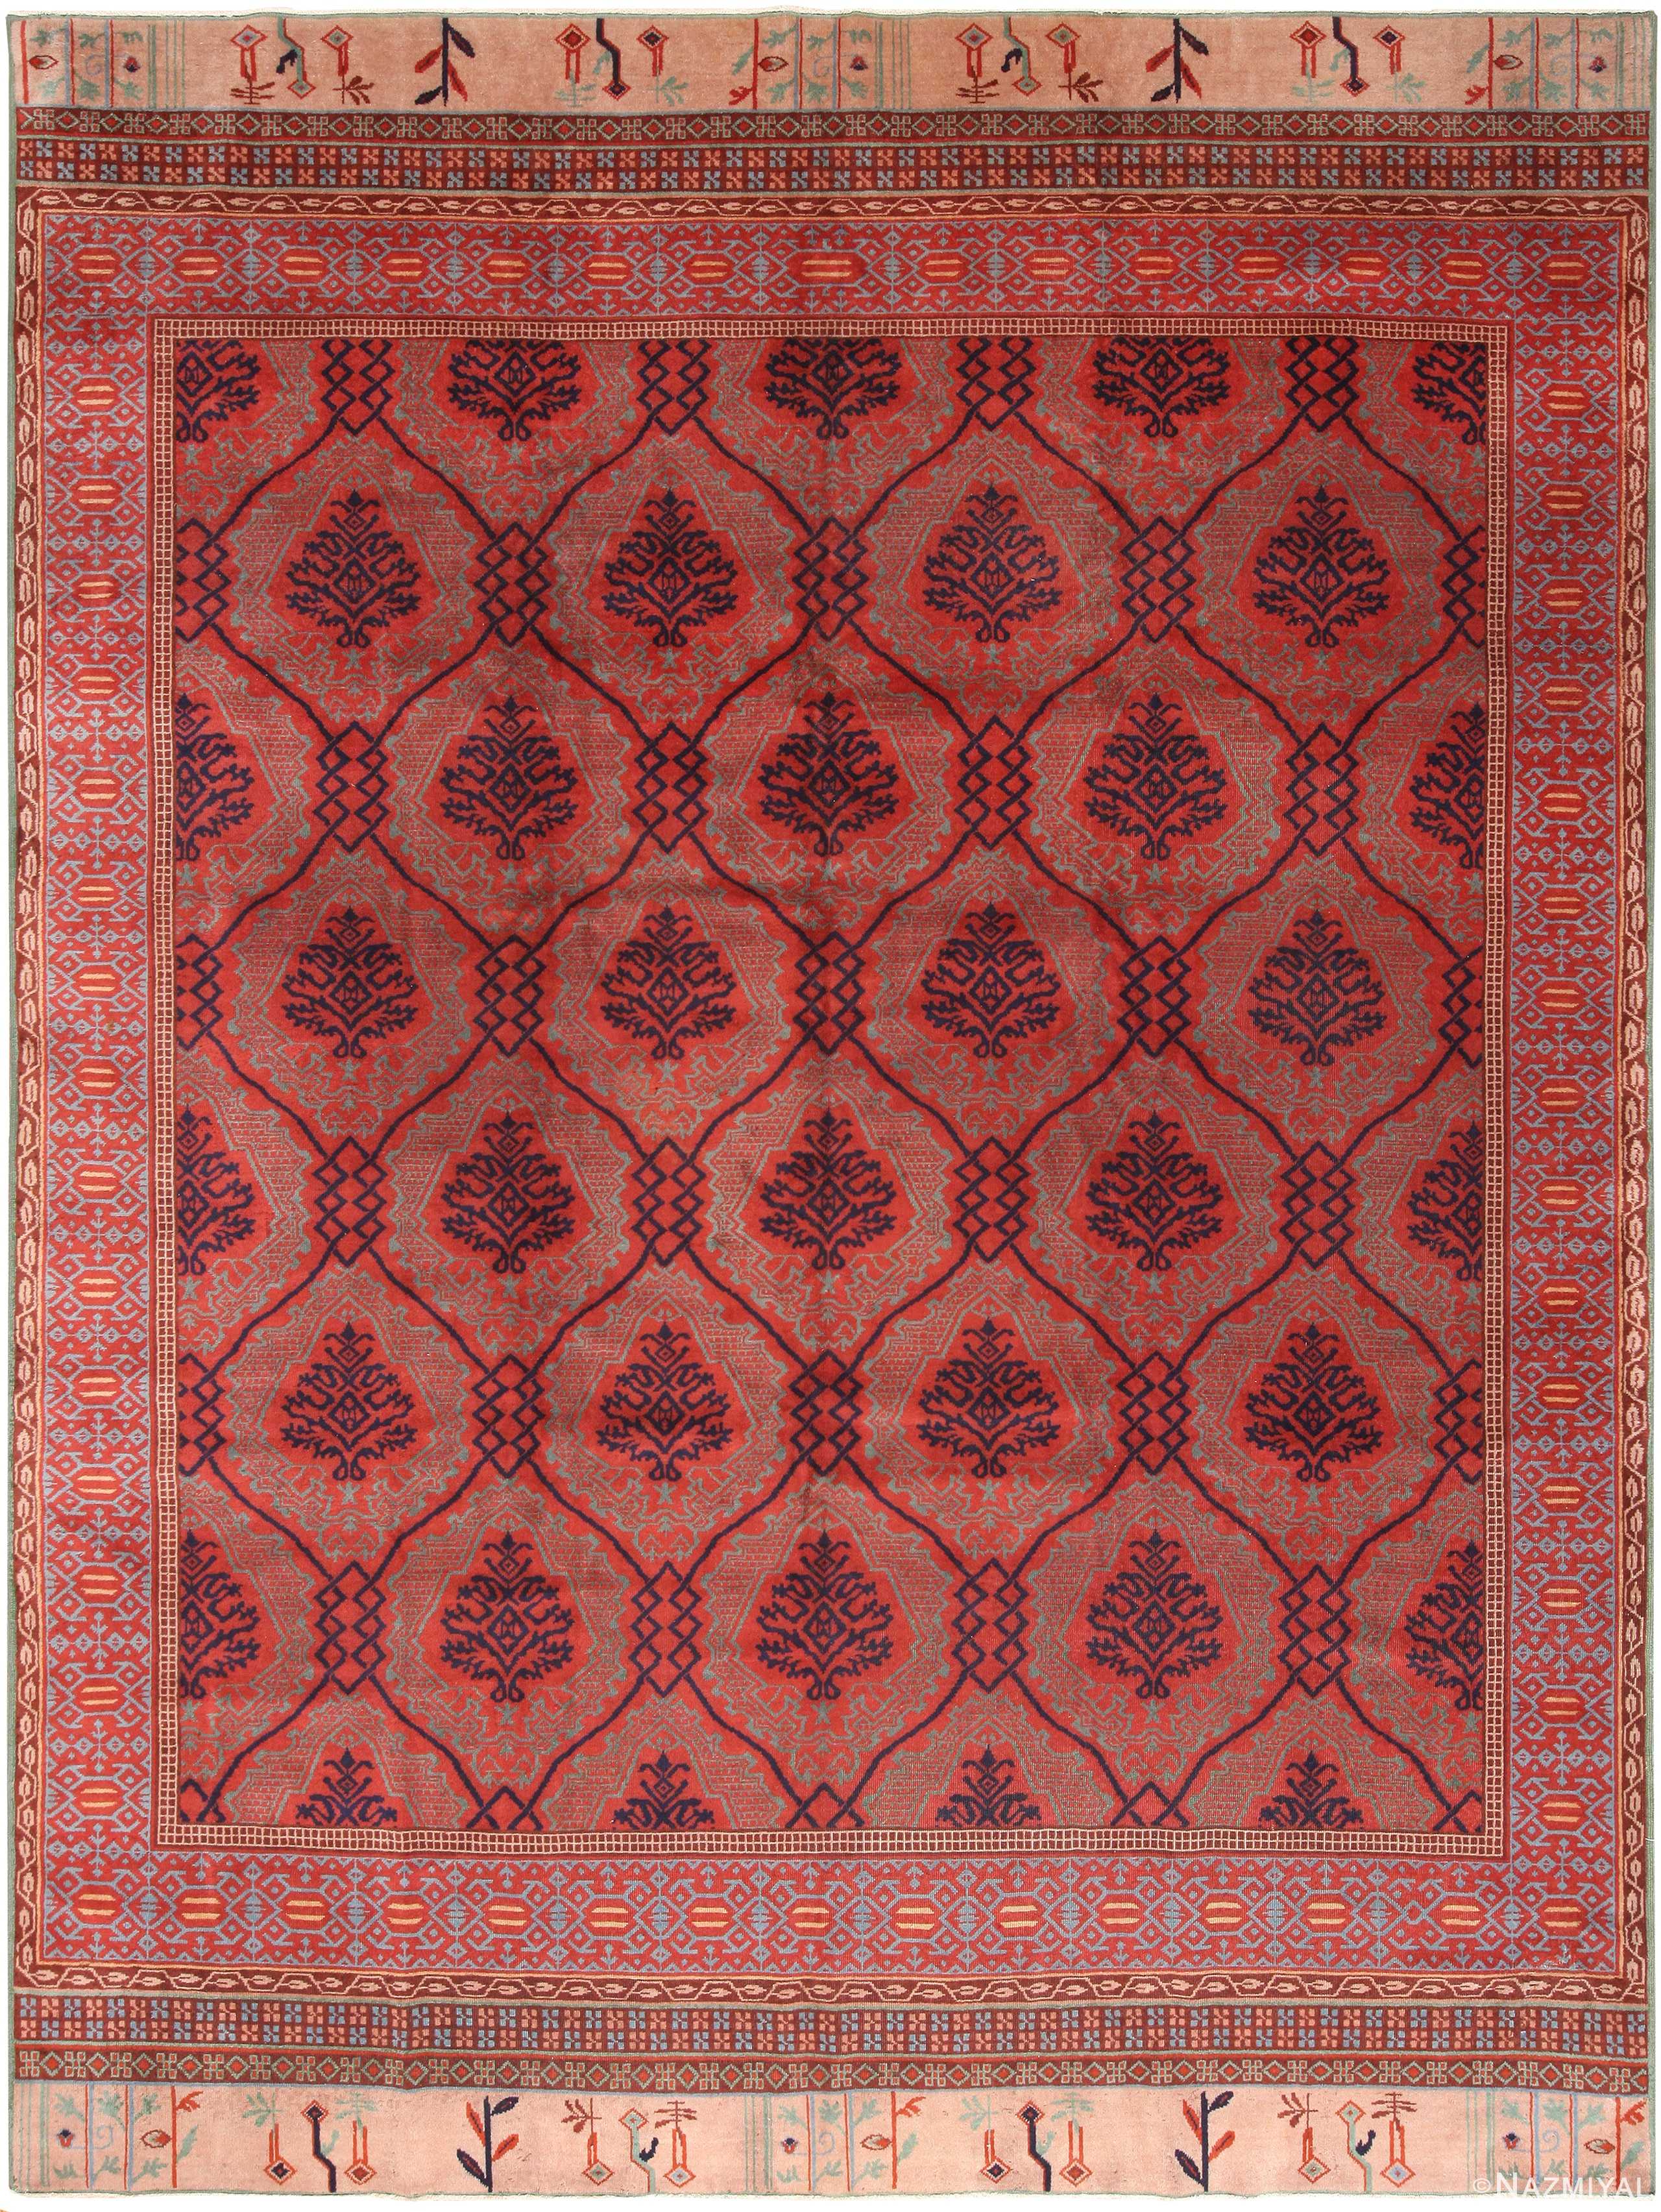 Red Antique Turkish Smyrna Area Rug 70930 by Nazmiyal Antique Rugs